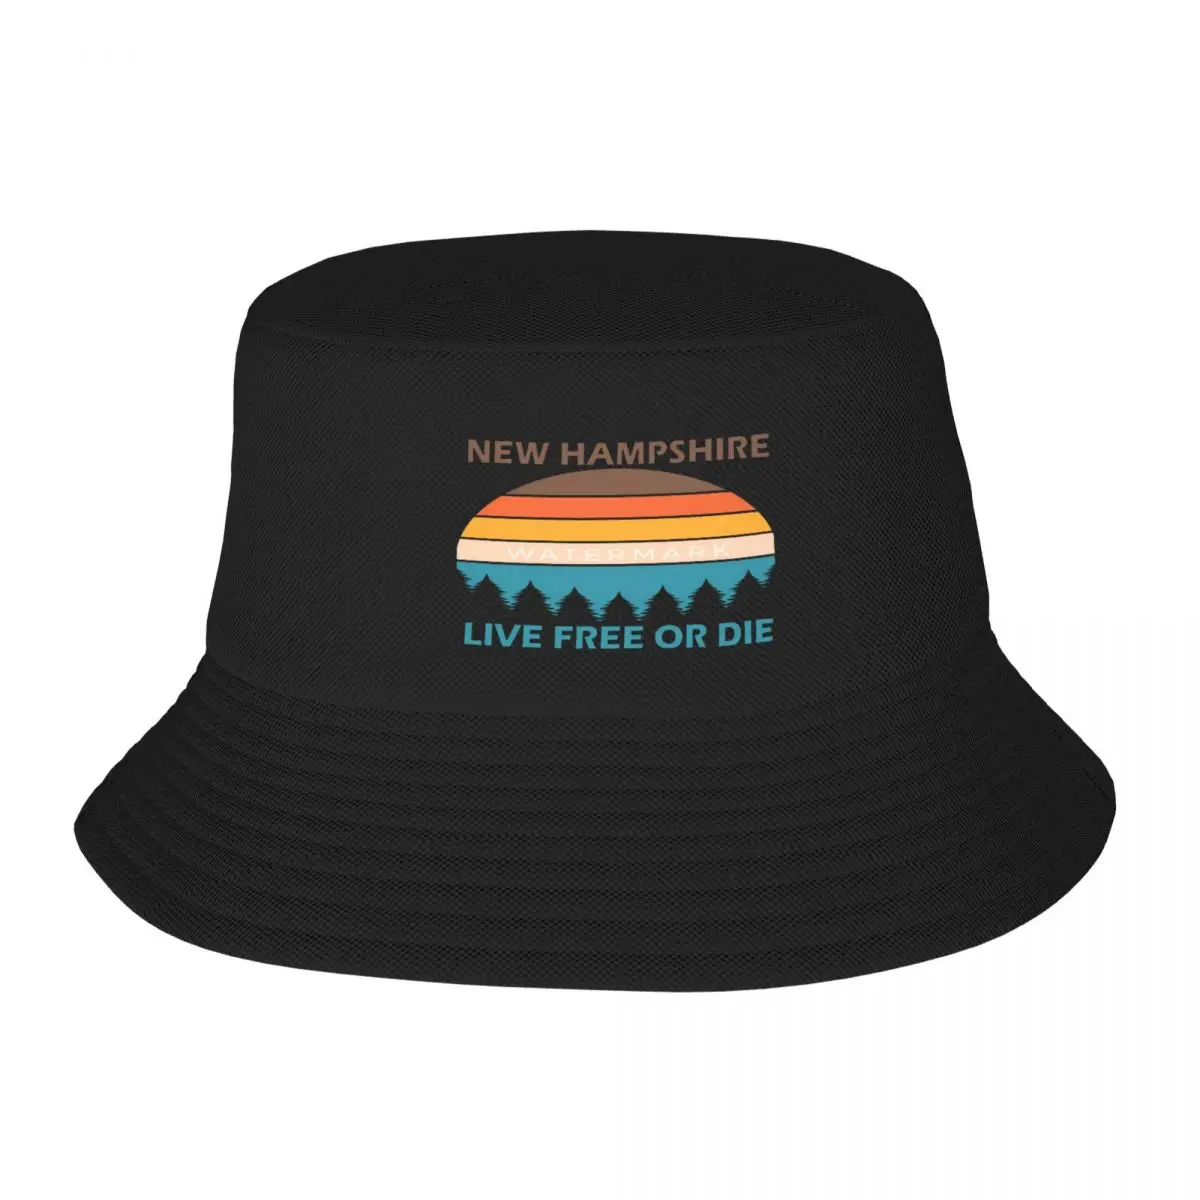 

New Hampshire Live Free Or Die Trees And Sunset Fisherman's Hat, Adult Cap Customizable For Adult Foldable Cap Nice Gift